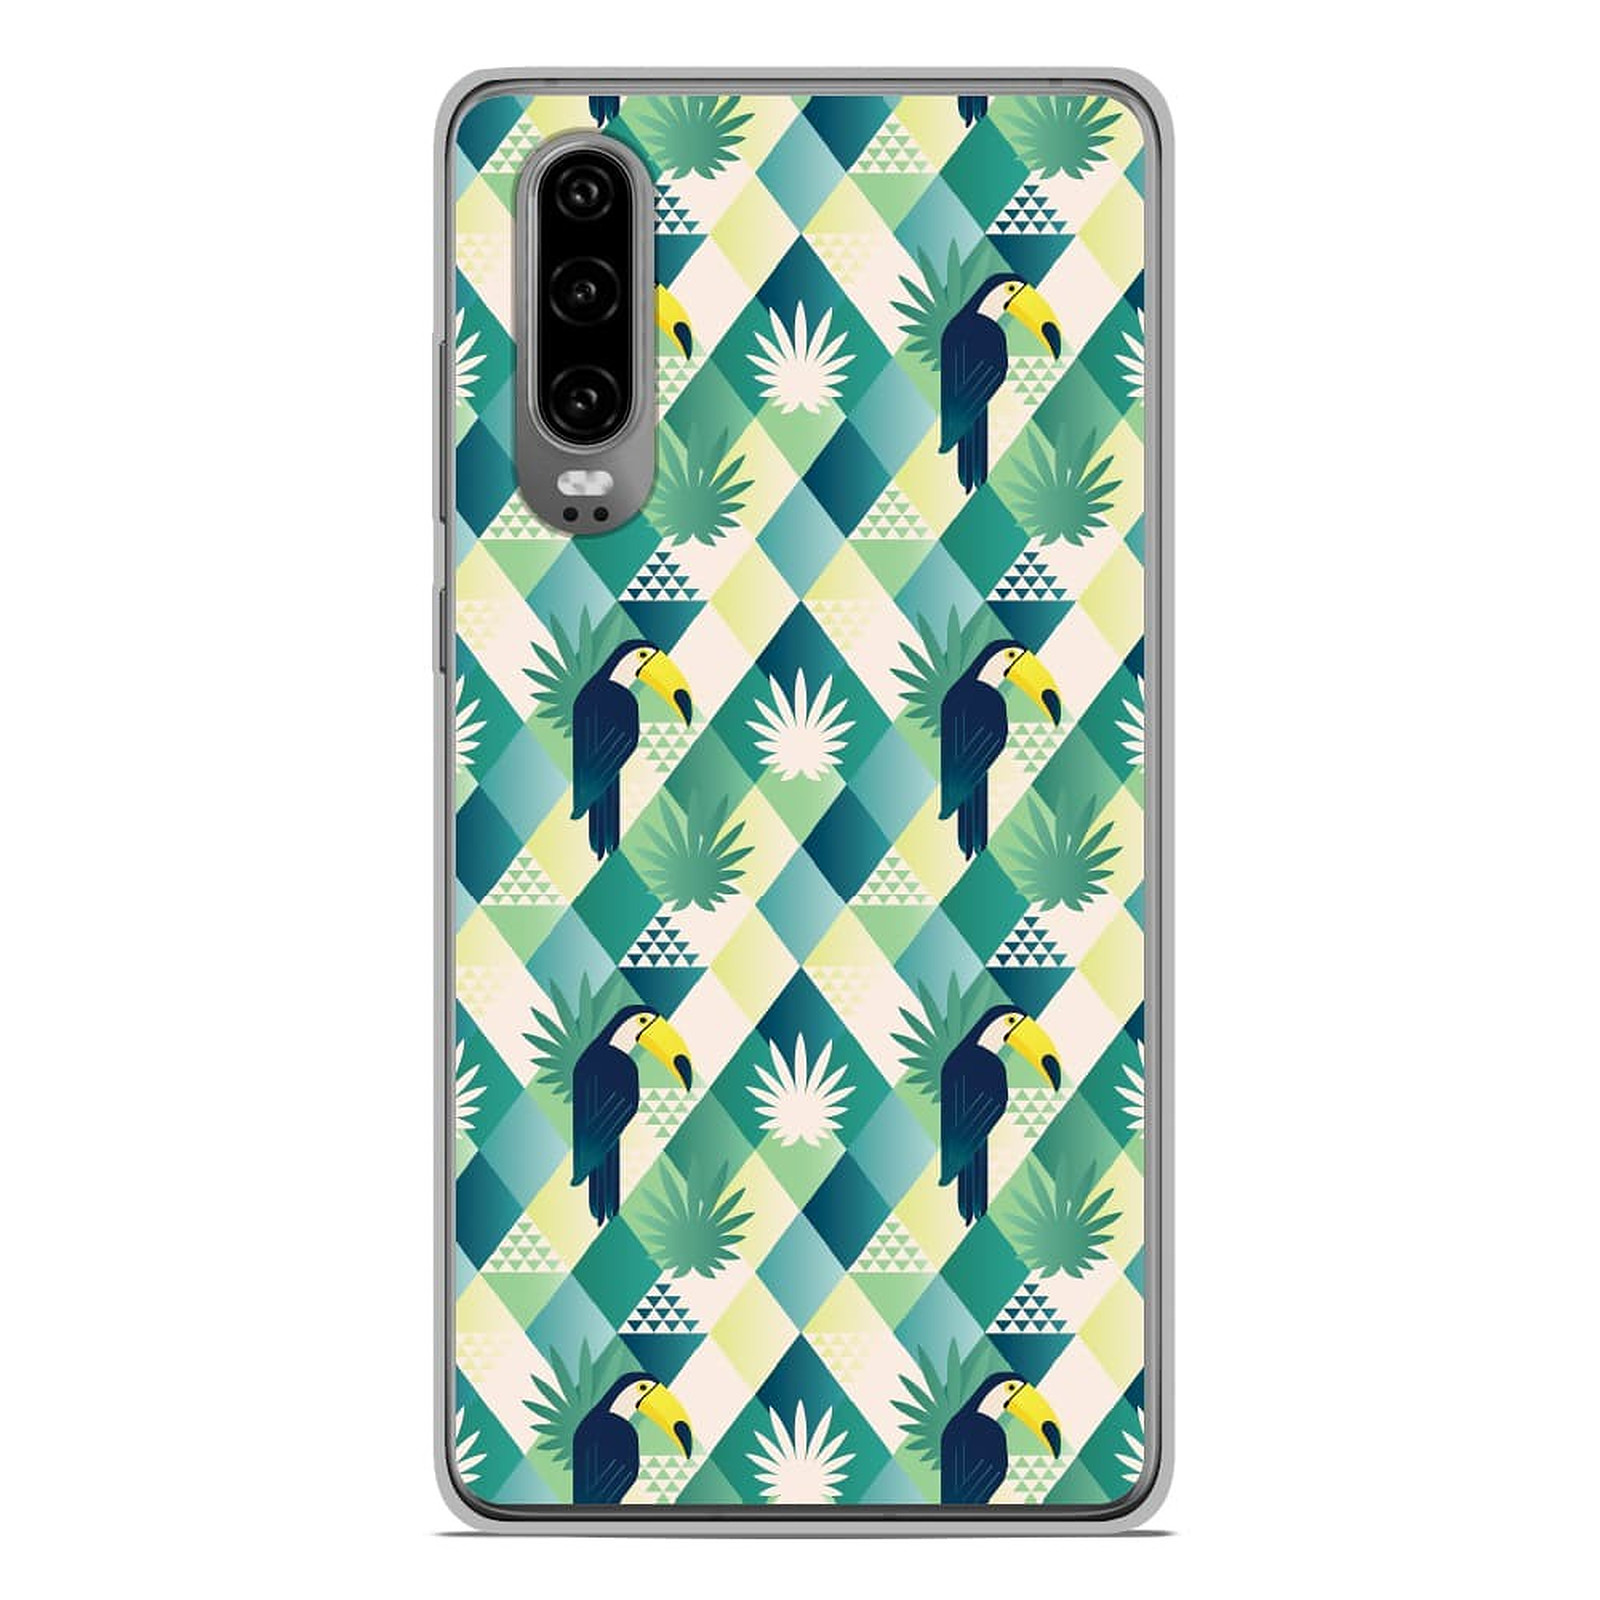 1001 Coques Coque silicone gel Huawei P30 motif Toucan losange - Coque telephone 1001Coques